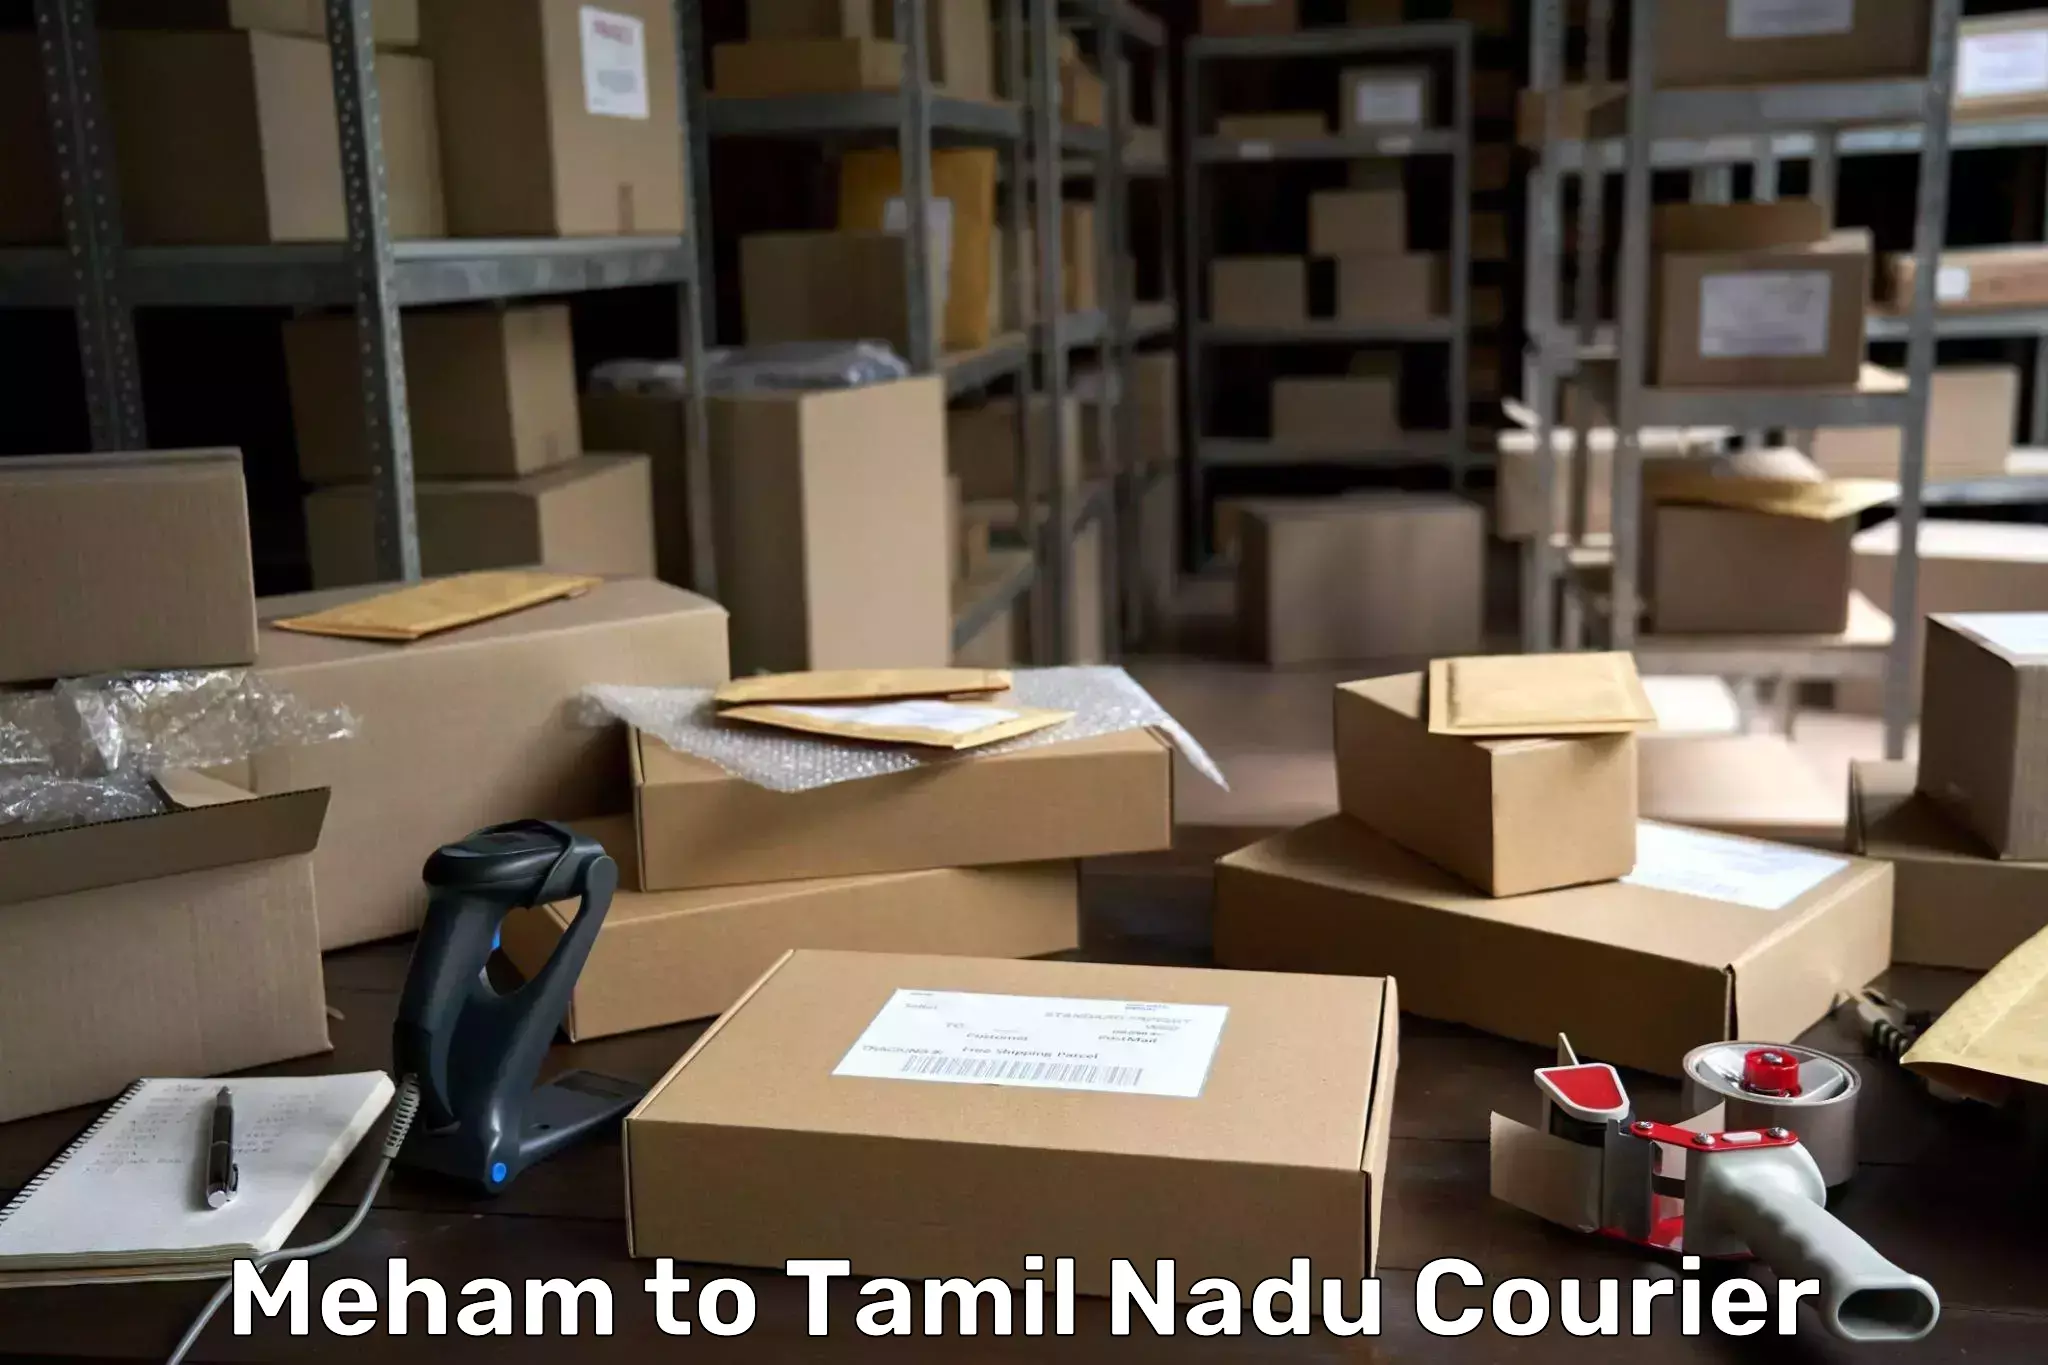 Express mail solutions Meham to Papanasam